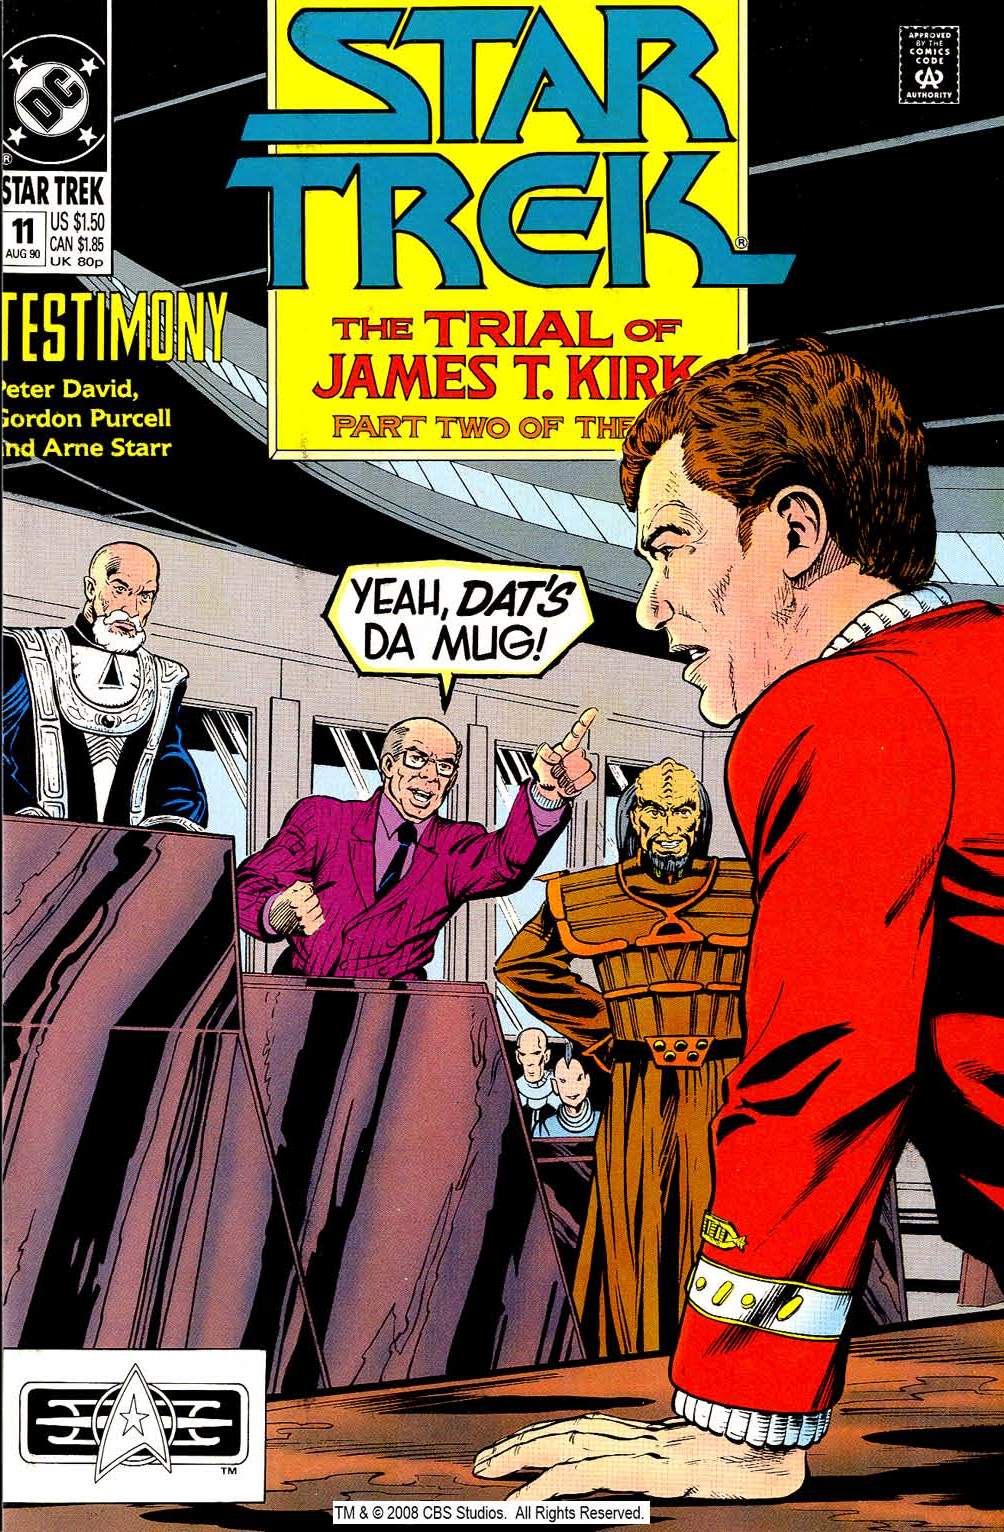 The trial of James T.Kirk.